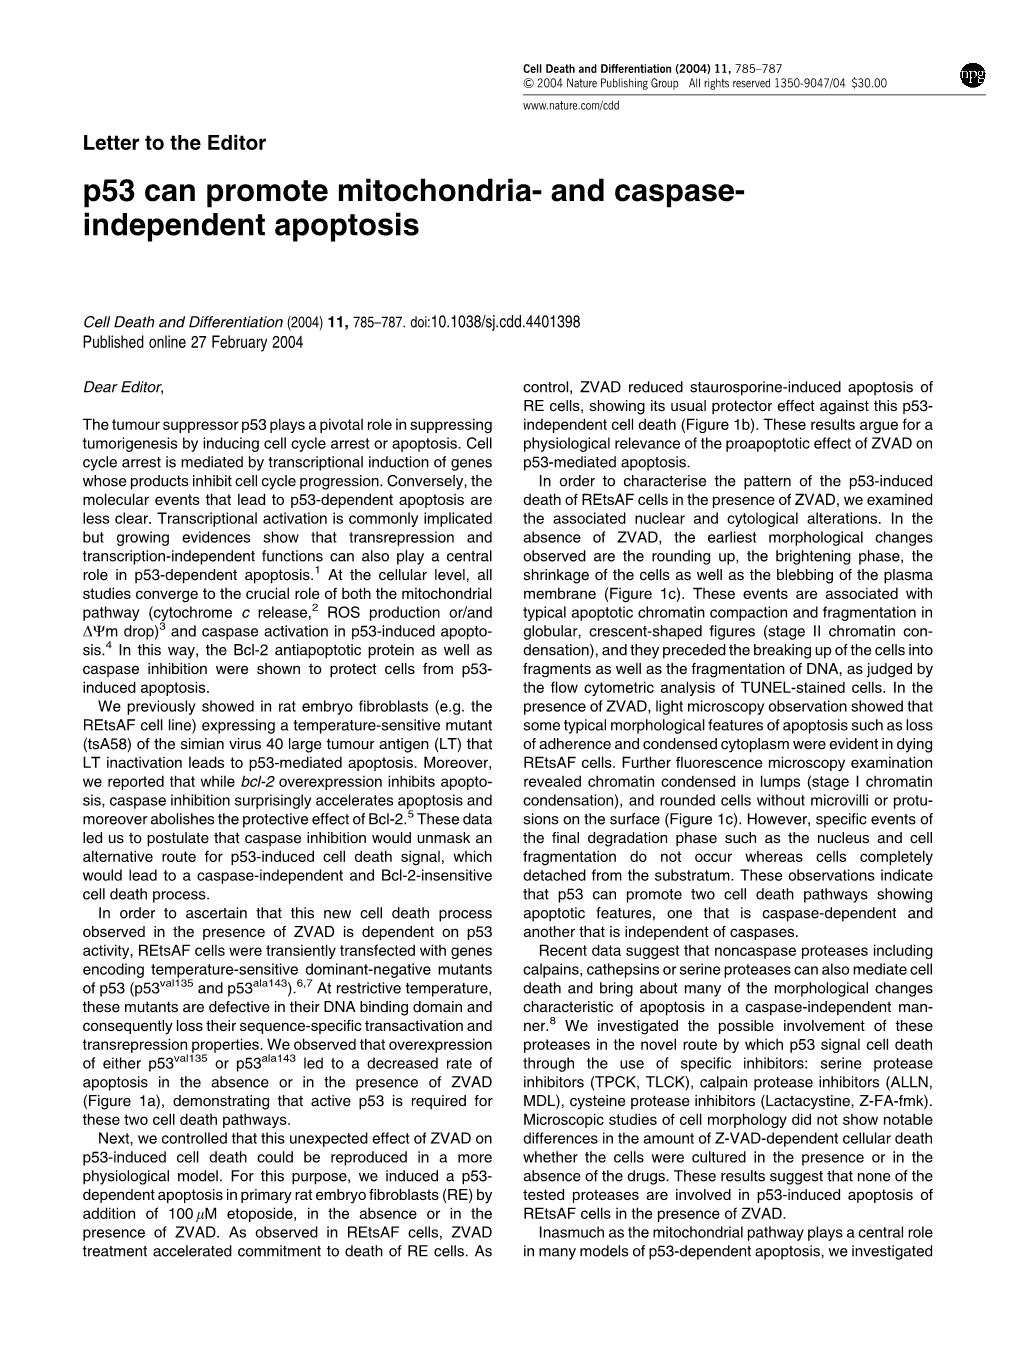 P53 Can Promote Mitochondria- and Caspase- Independent Apoptosis